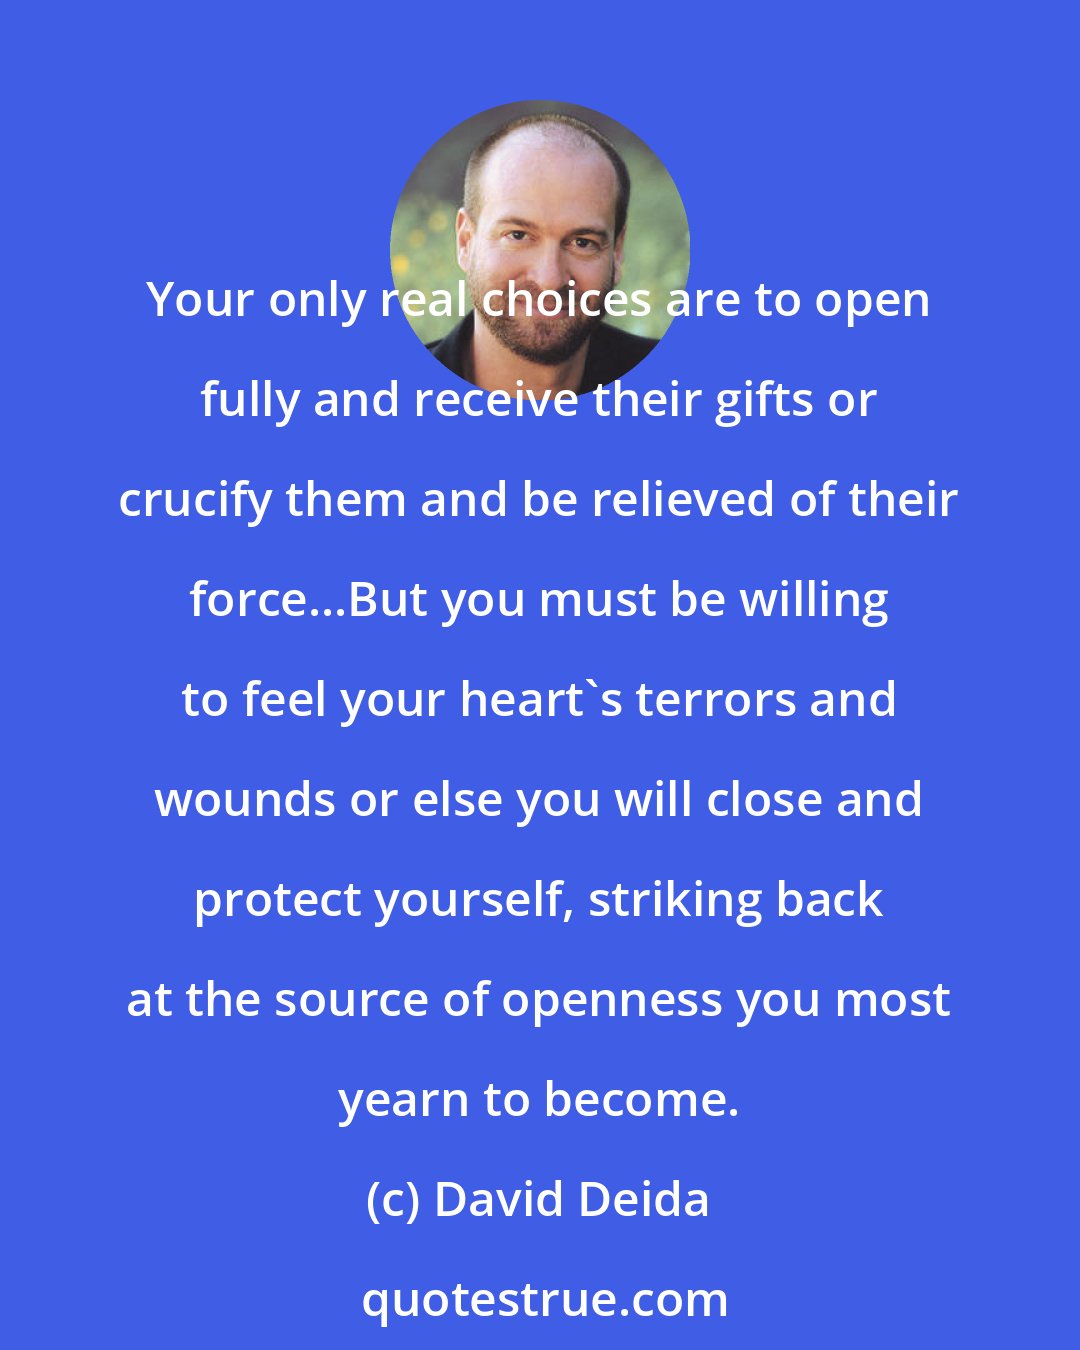 David Deida: Your only real choices are to open fully and receive their gifts or crucify them and be relieved of their force...But you must be willing to feel your heart's terrors and wounds or else you will close and protect yourself, striking back at the source of openness you most yearn to become.